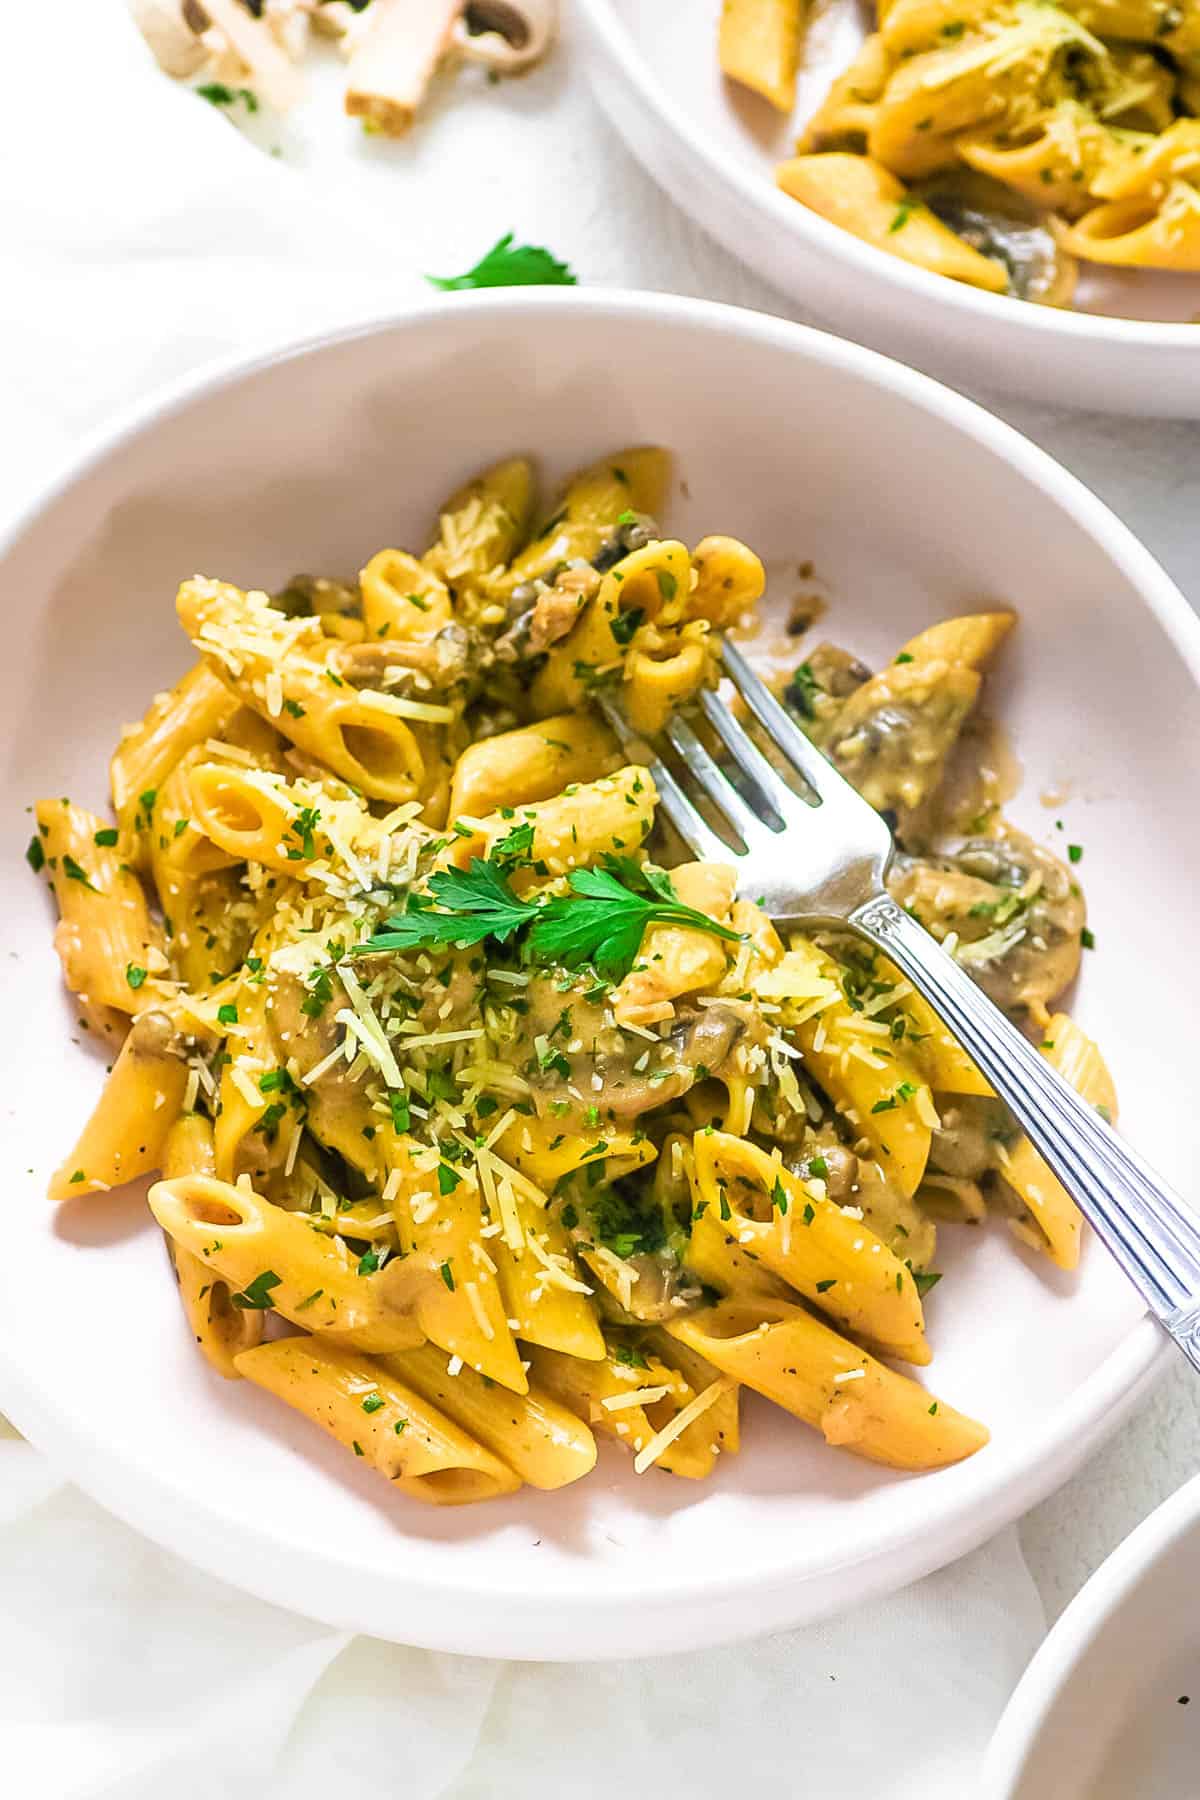 Vegan creamy mushroom pasta in a white bowl with a fork, topped with fresh herbs.